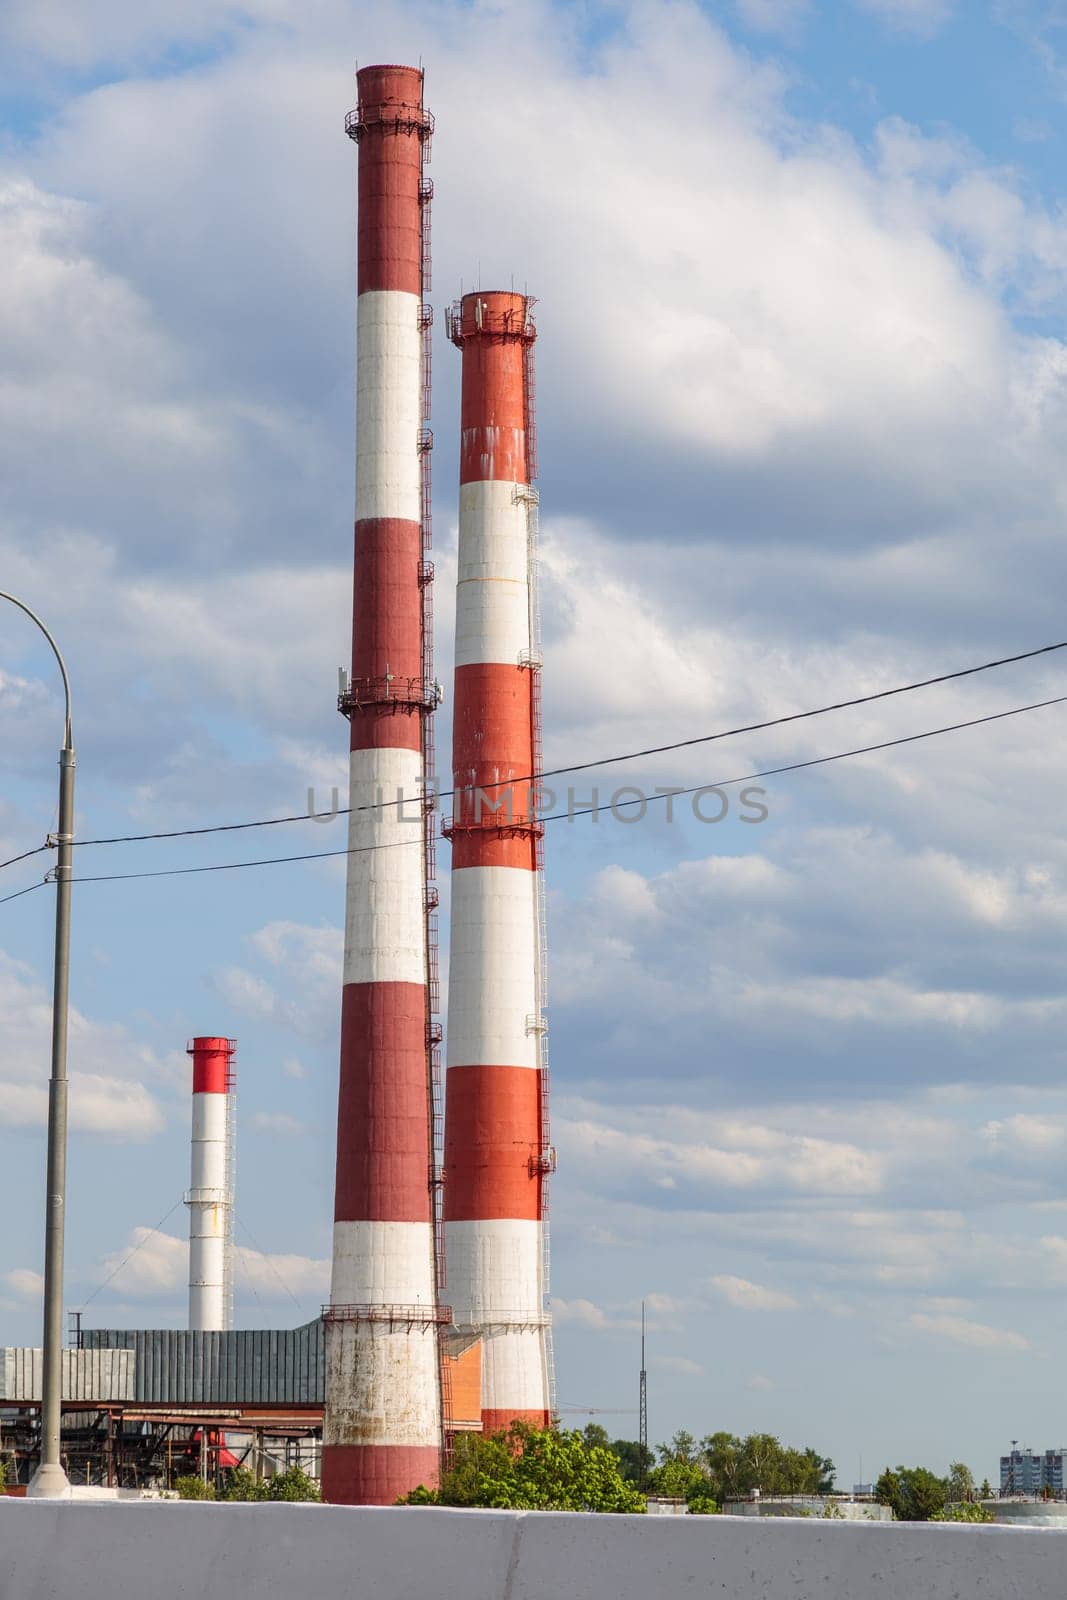 Industrial plant with tall chimneys against the blue sky. High quality photo